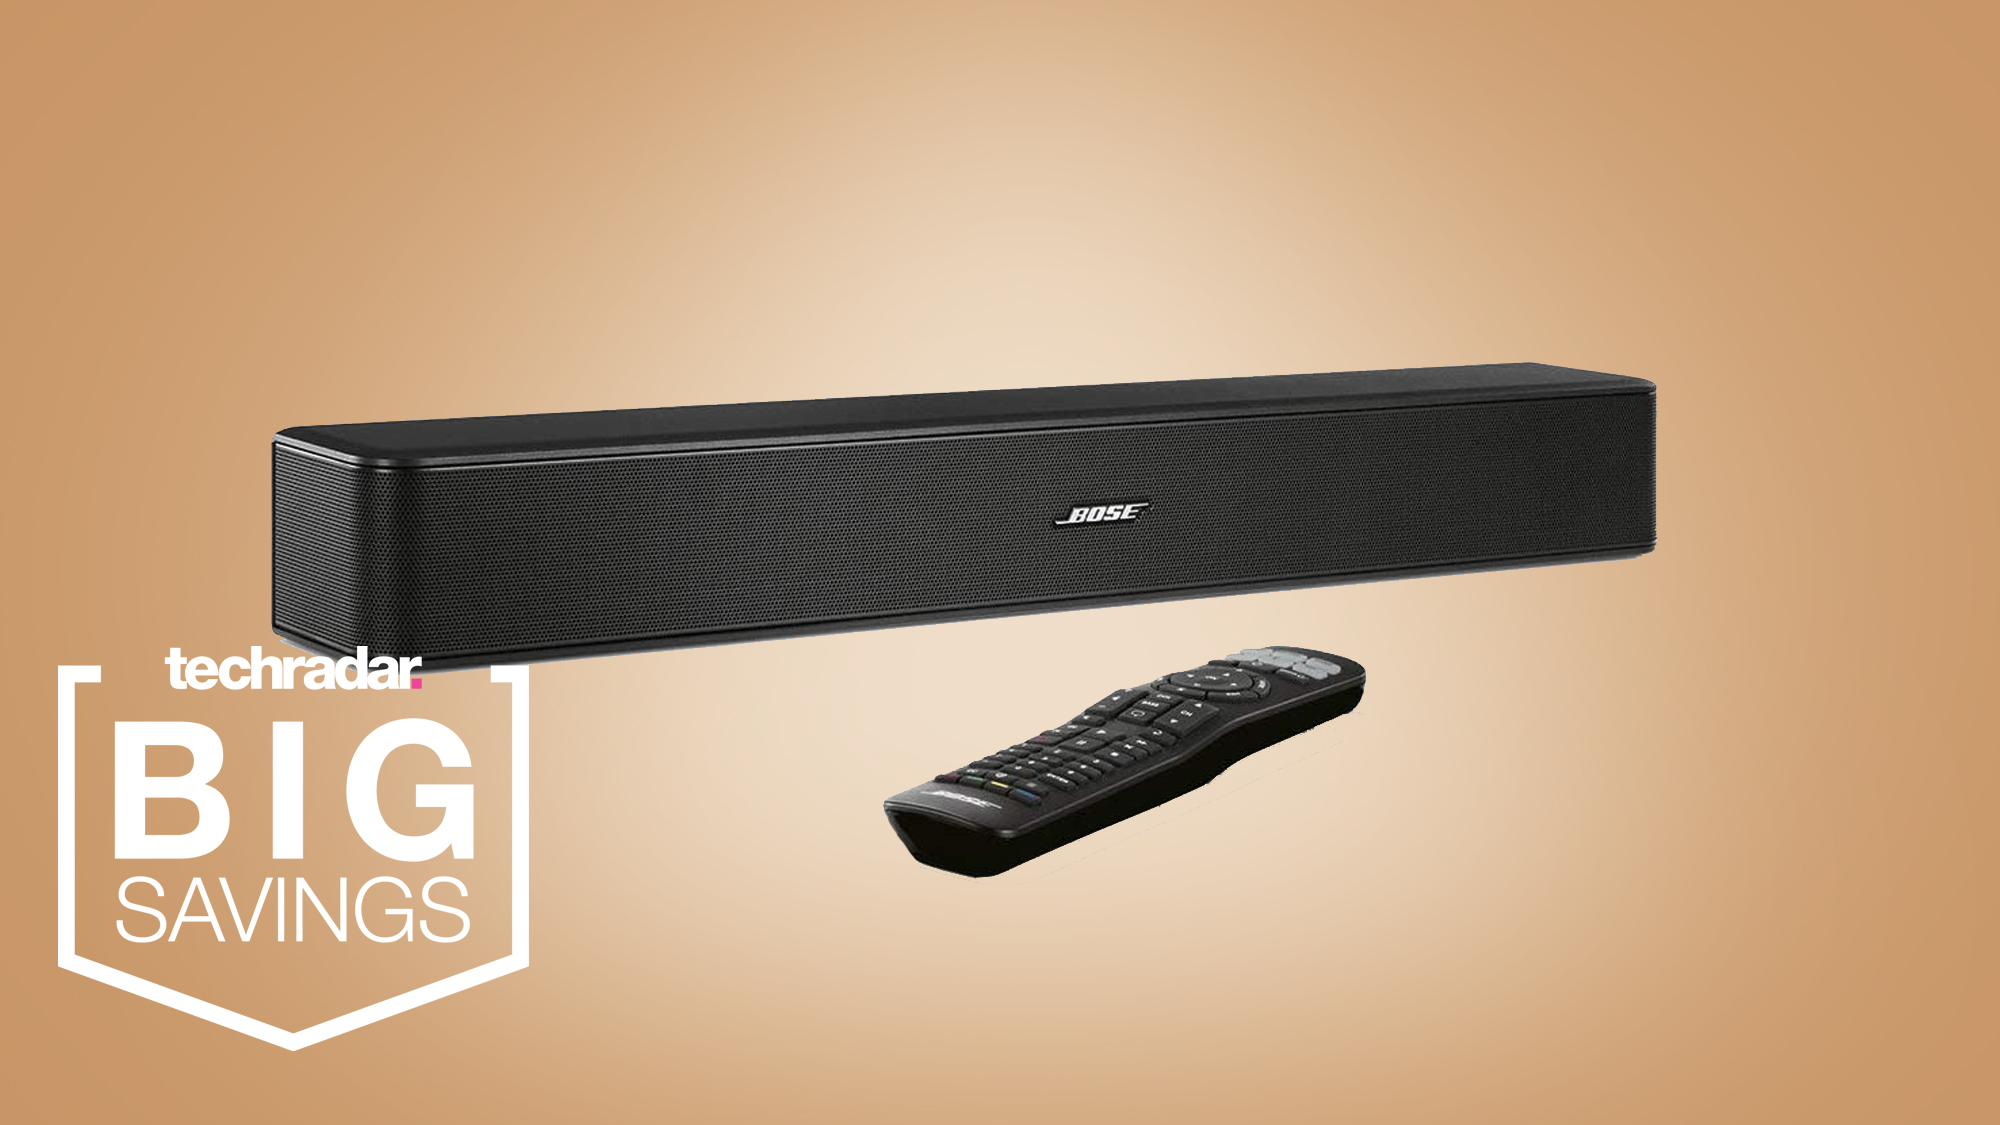 rookie forvisning at klemme Need a cheap soundbar? Then don't miss this Bose Solo 5 deal | TechRadar